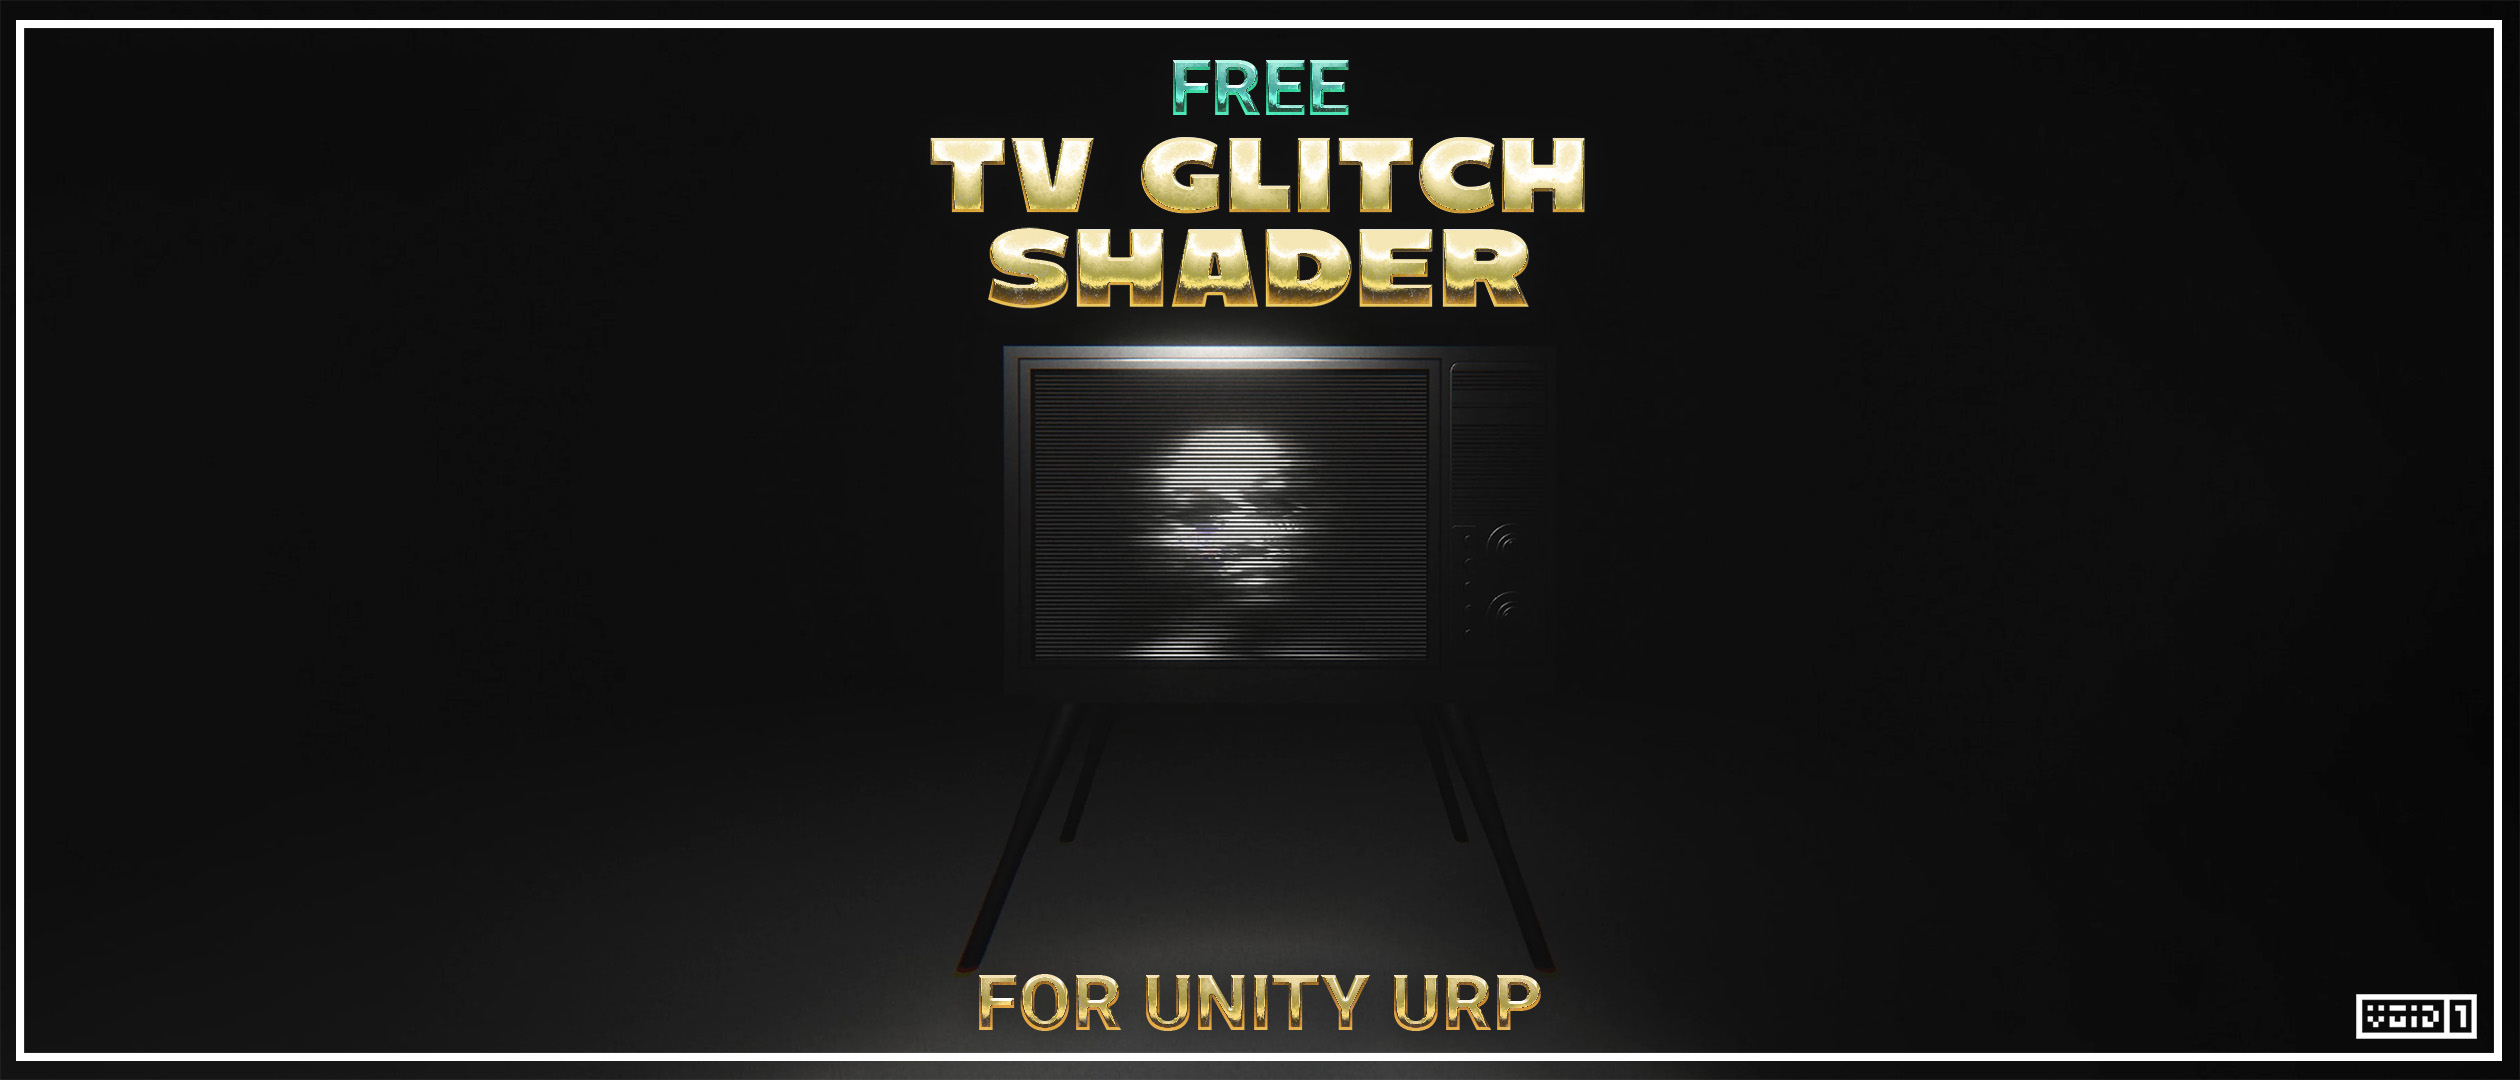 Free TV Glitch Shader for Unity URP